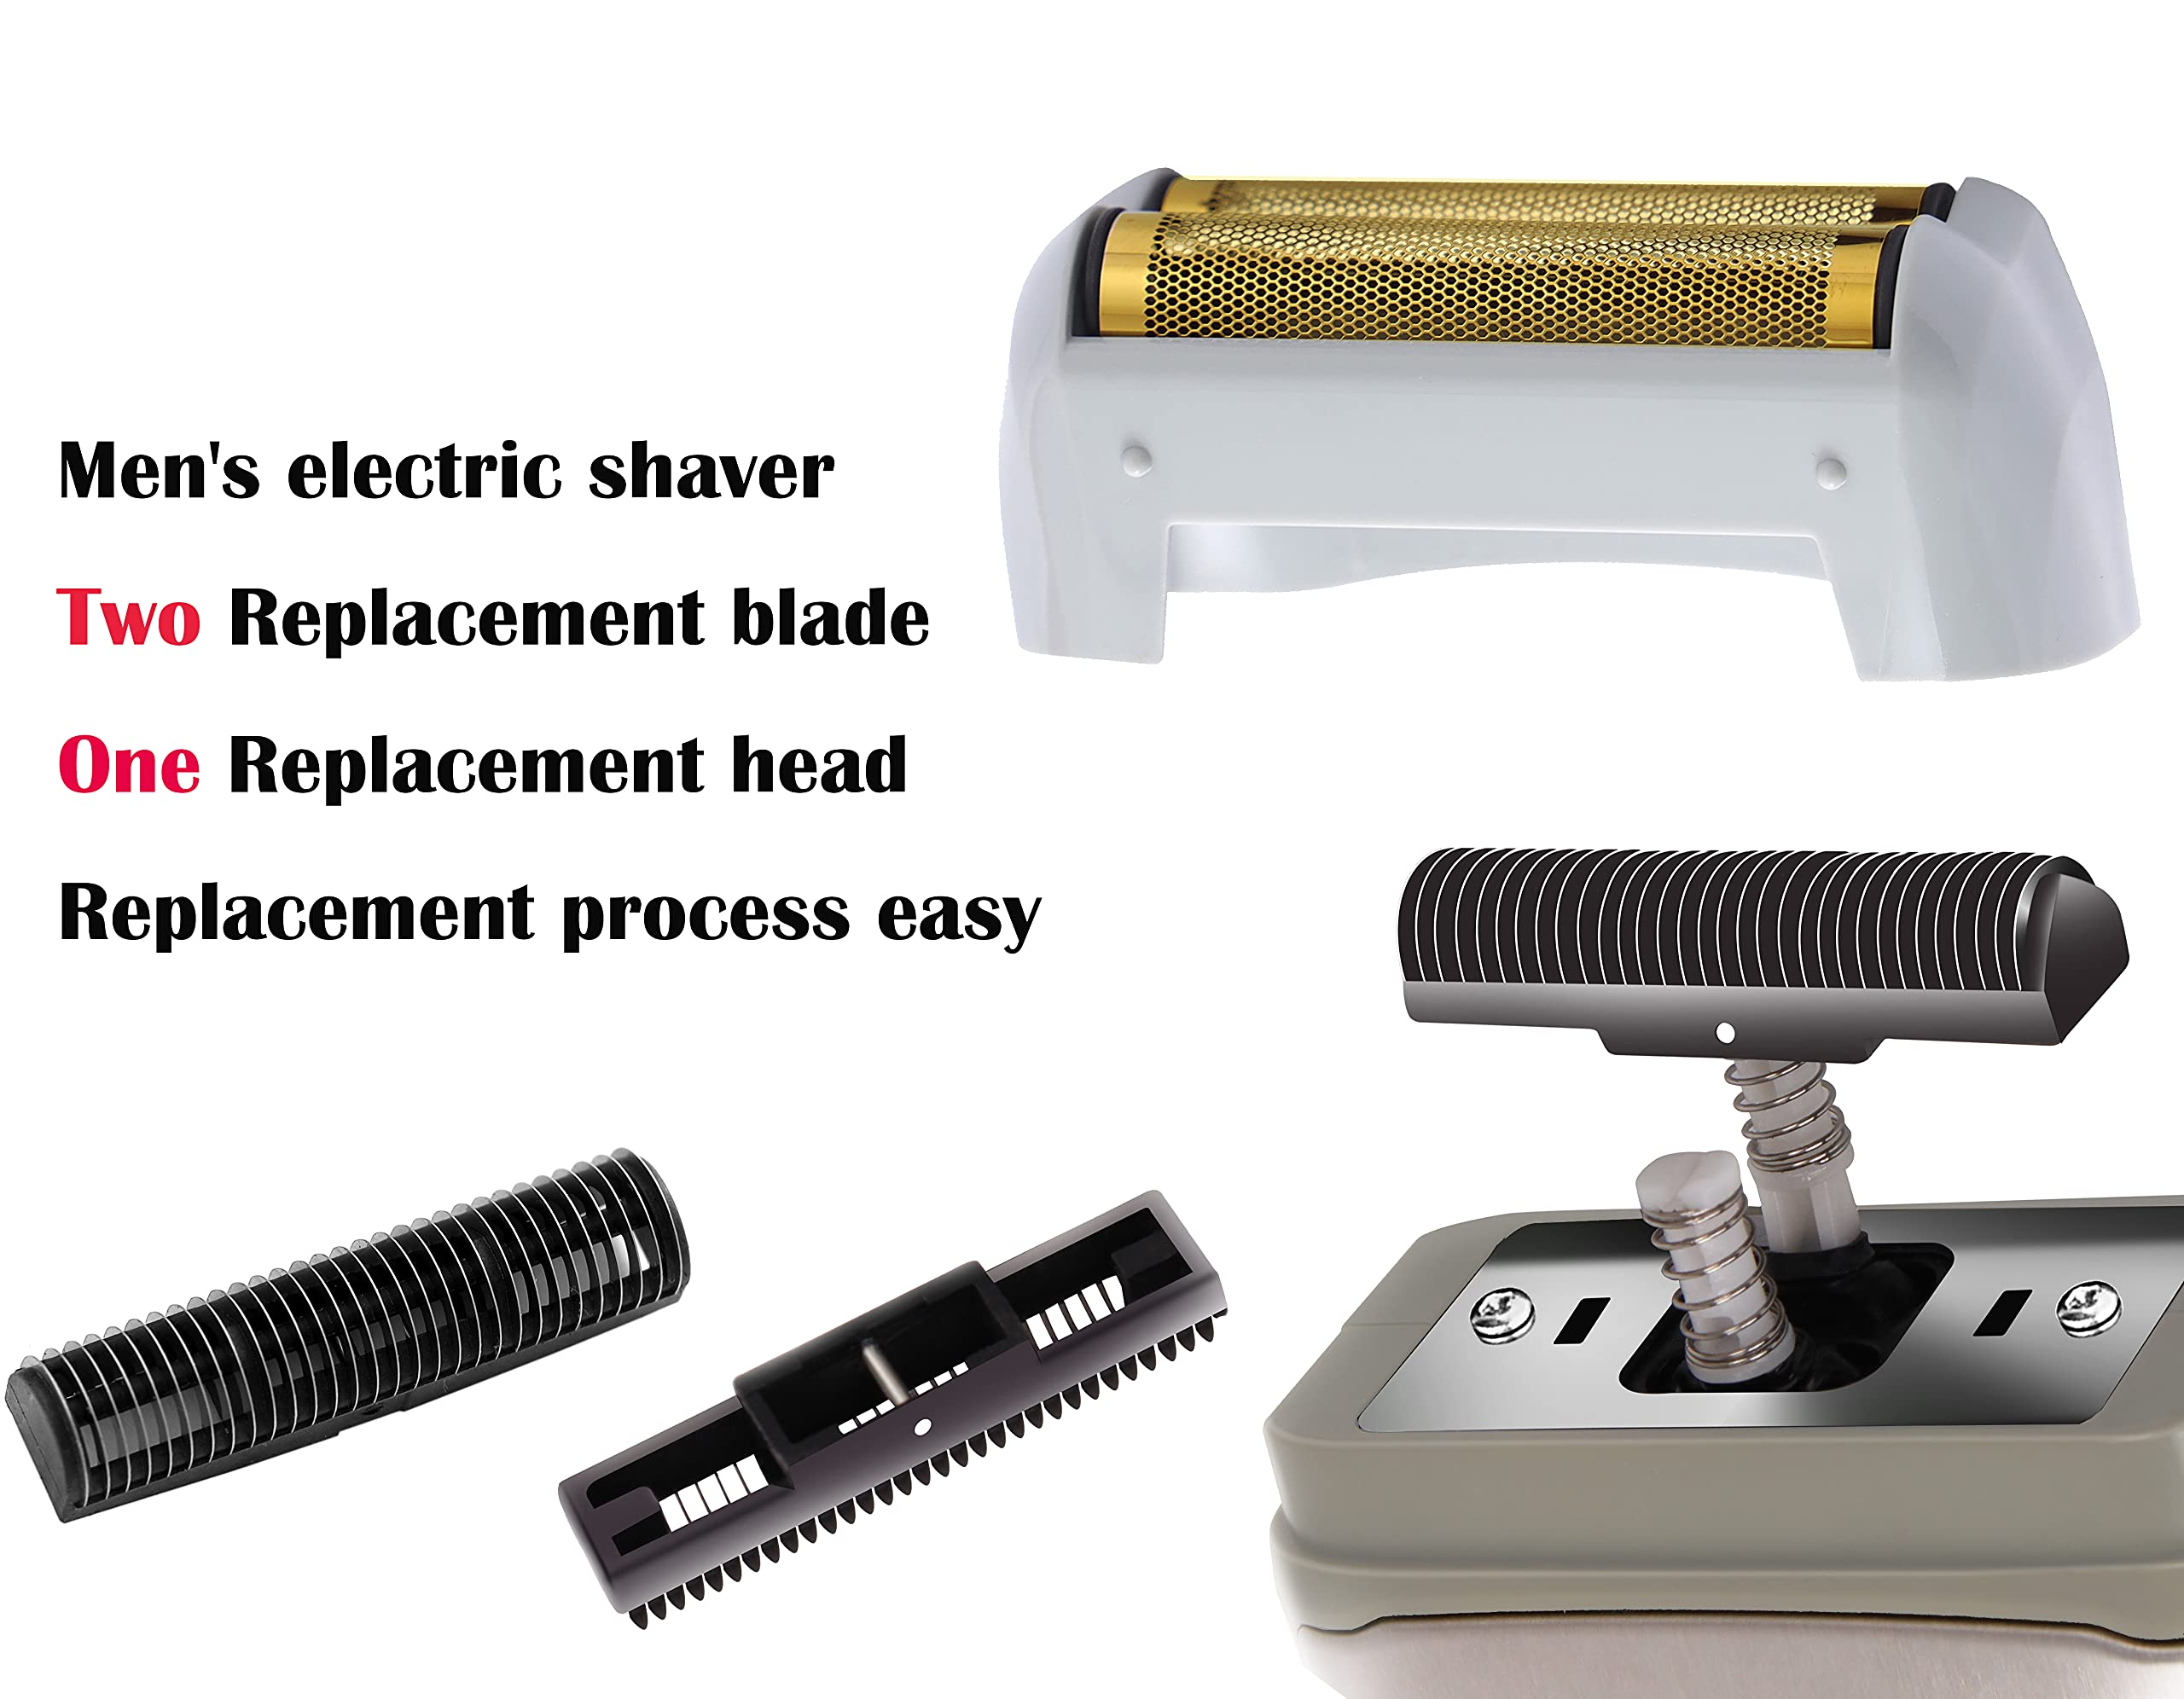 Andis 17155 Pro Shaver Replacement - 3 